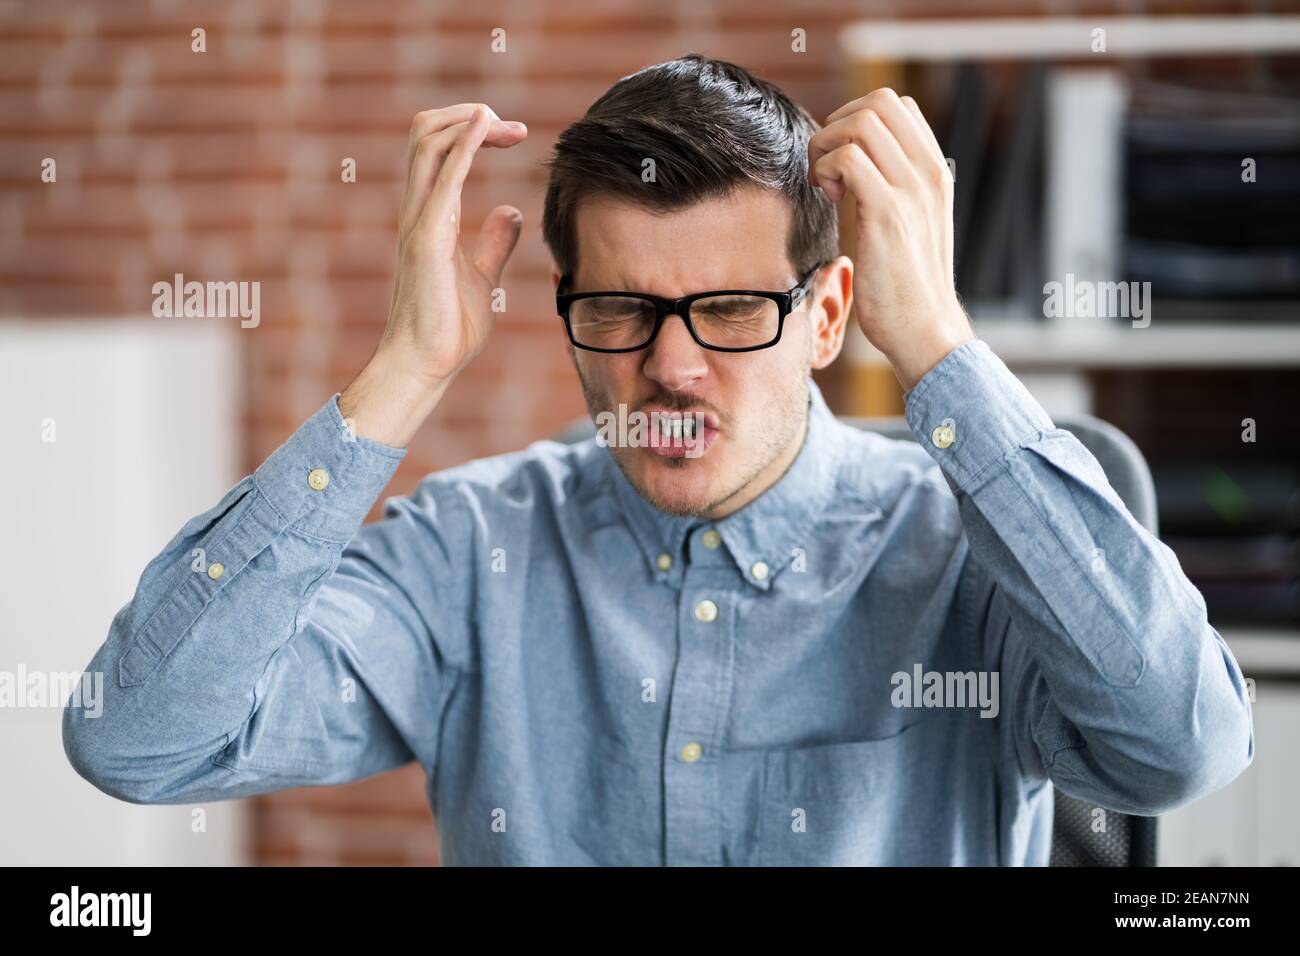 Workplace Quarrel. Angry Looking Man Stock Photo